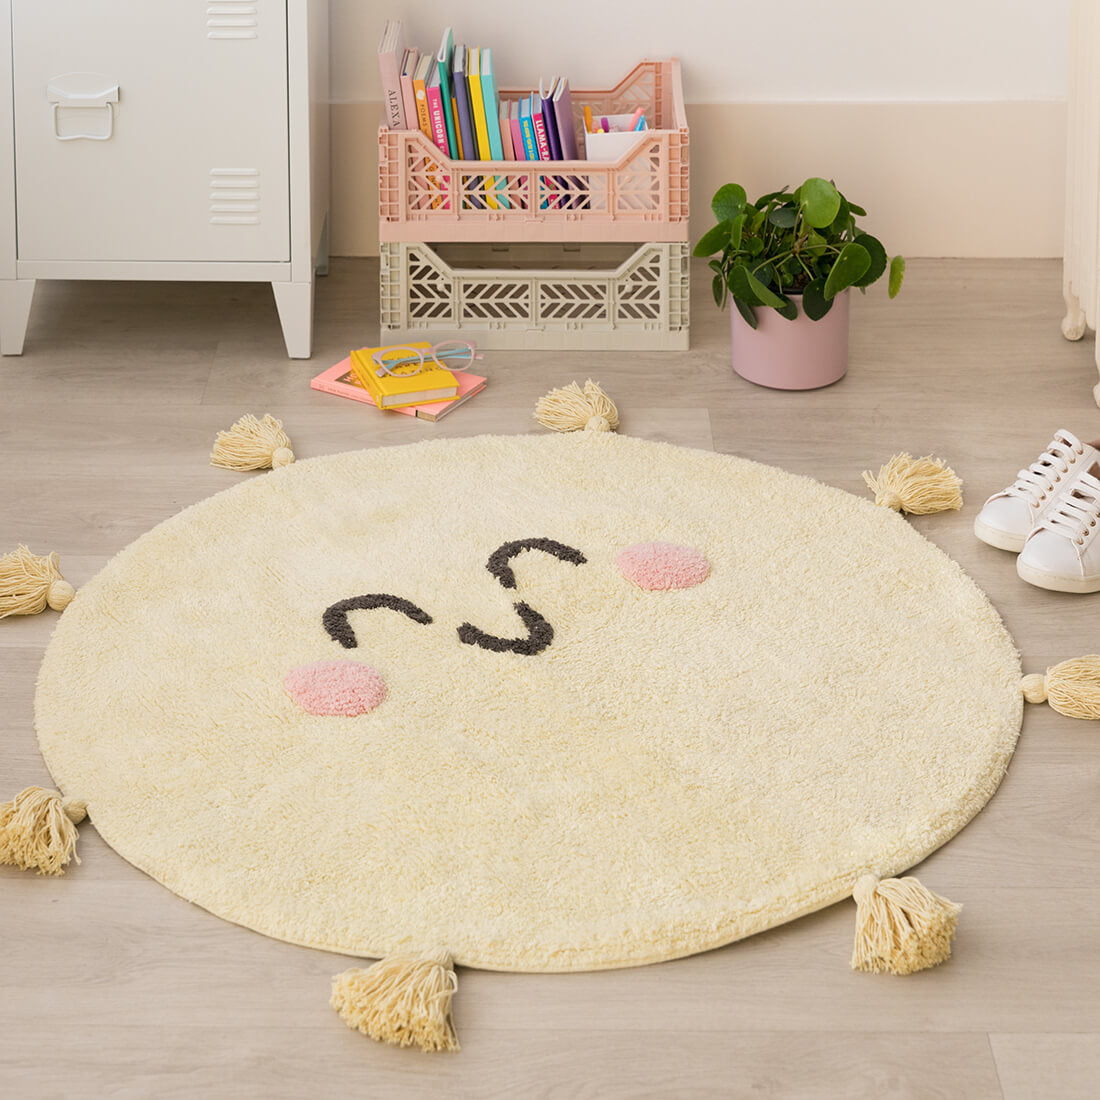  cotton tufted round rug shaped as a smiling sun